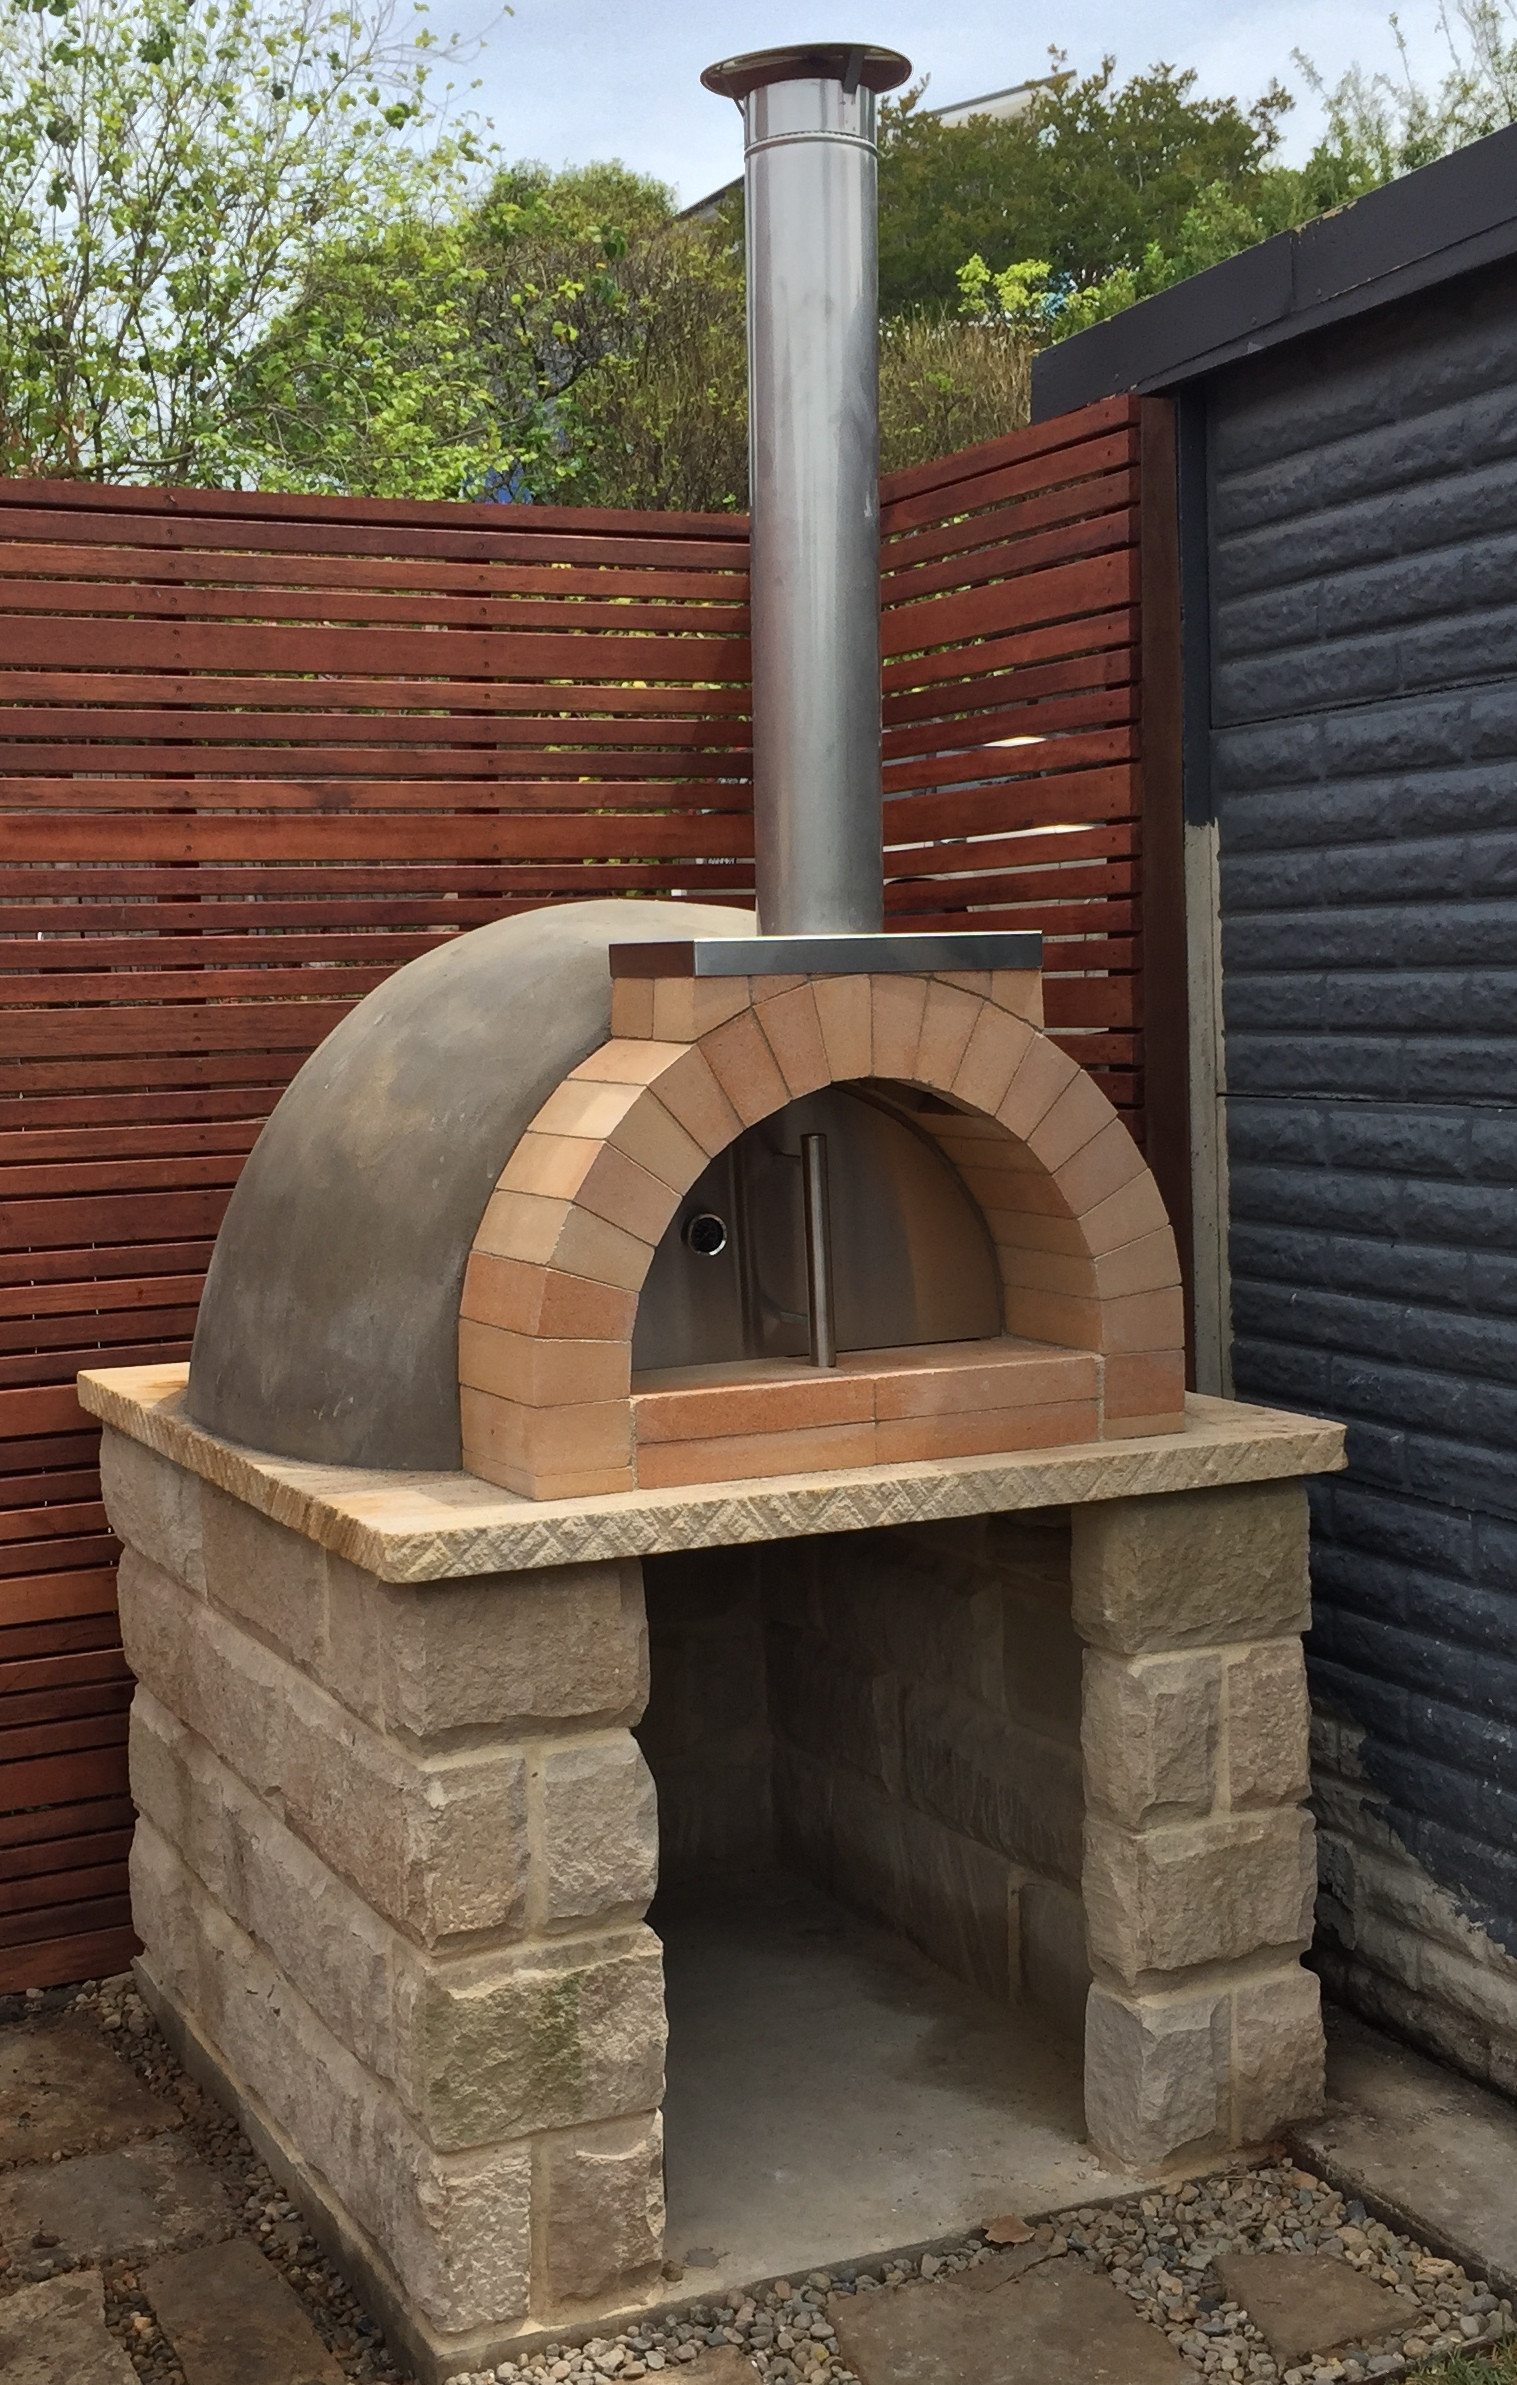 DIY Pizza Oven Kit
 Buy Calabrese entertainer woodfired pizza oven DIY kit